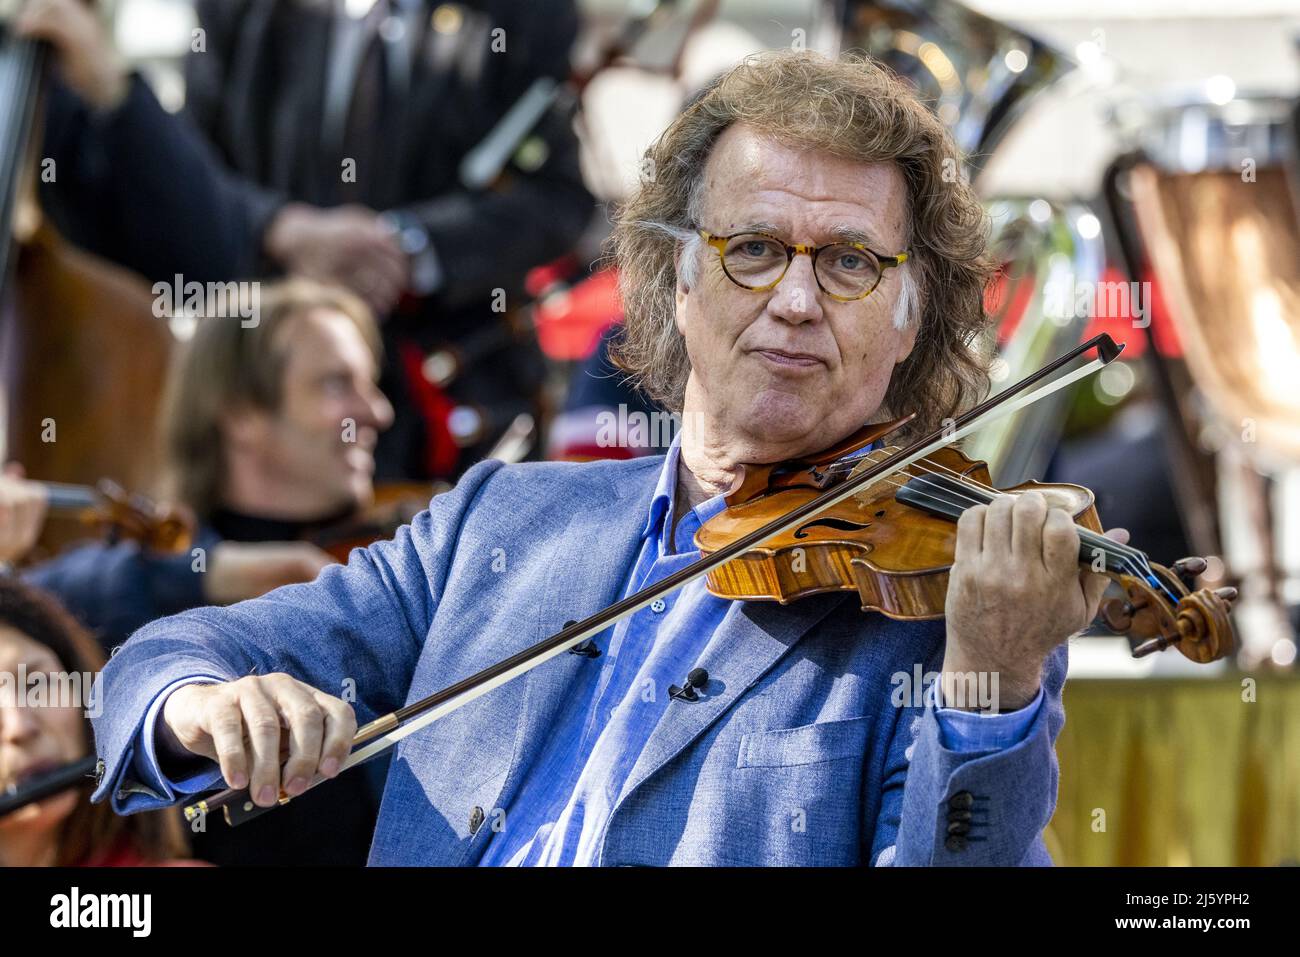 2022-04-26 17:04:34 MAASTRICHT - Andre Rieu during the dress rehearsal for King's Day. ANP MARCEL VAN HORN netherlands out - belgium out Stock Photo